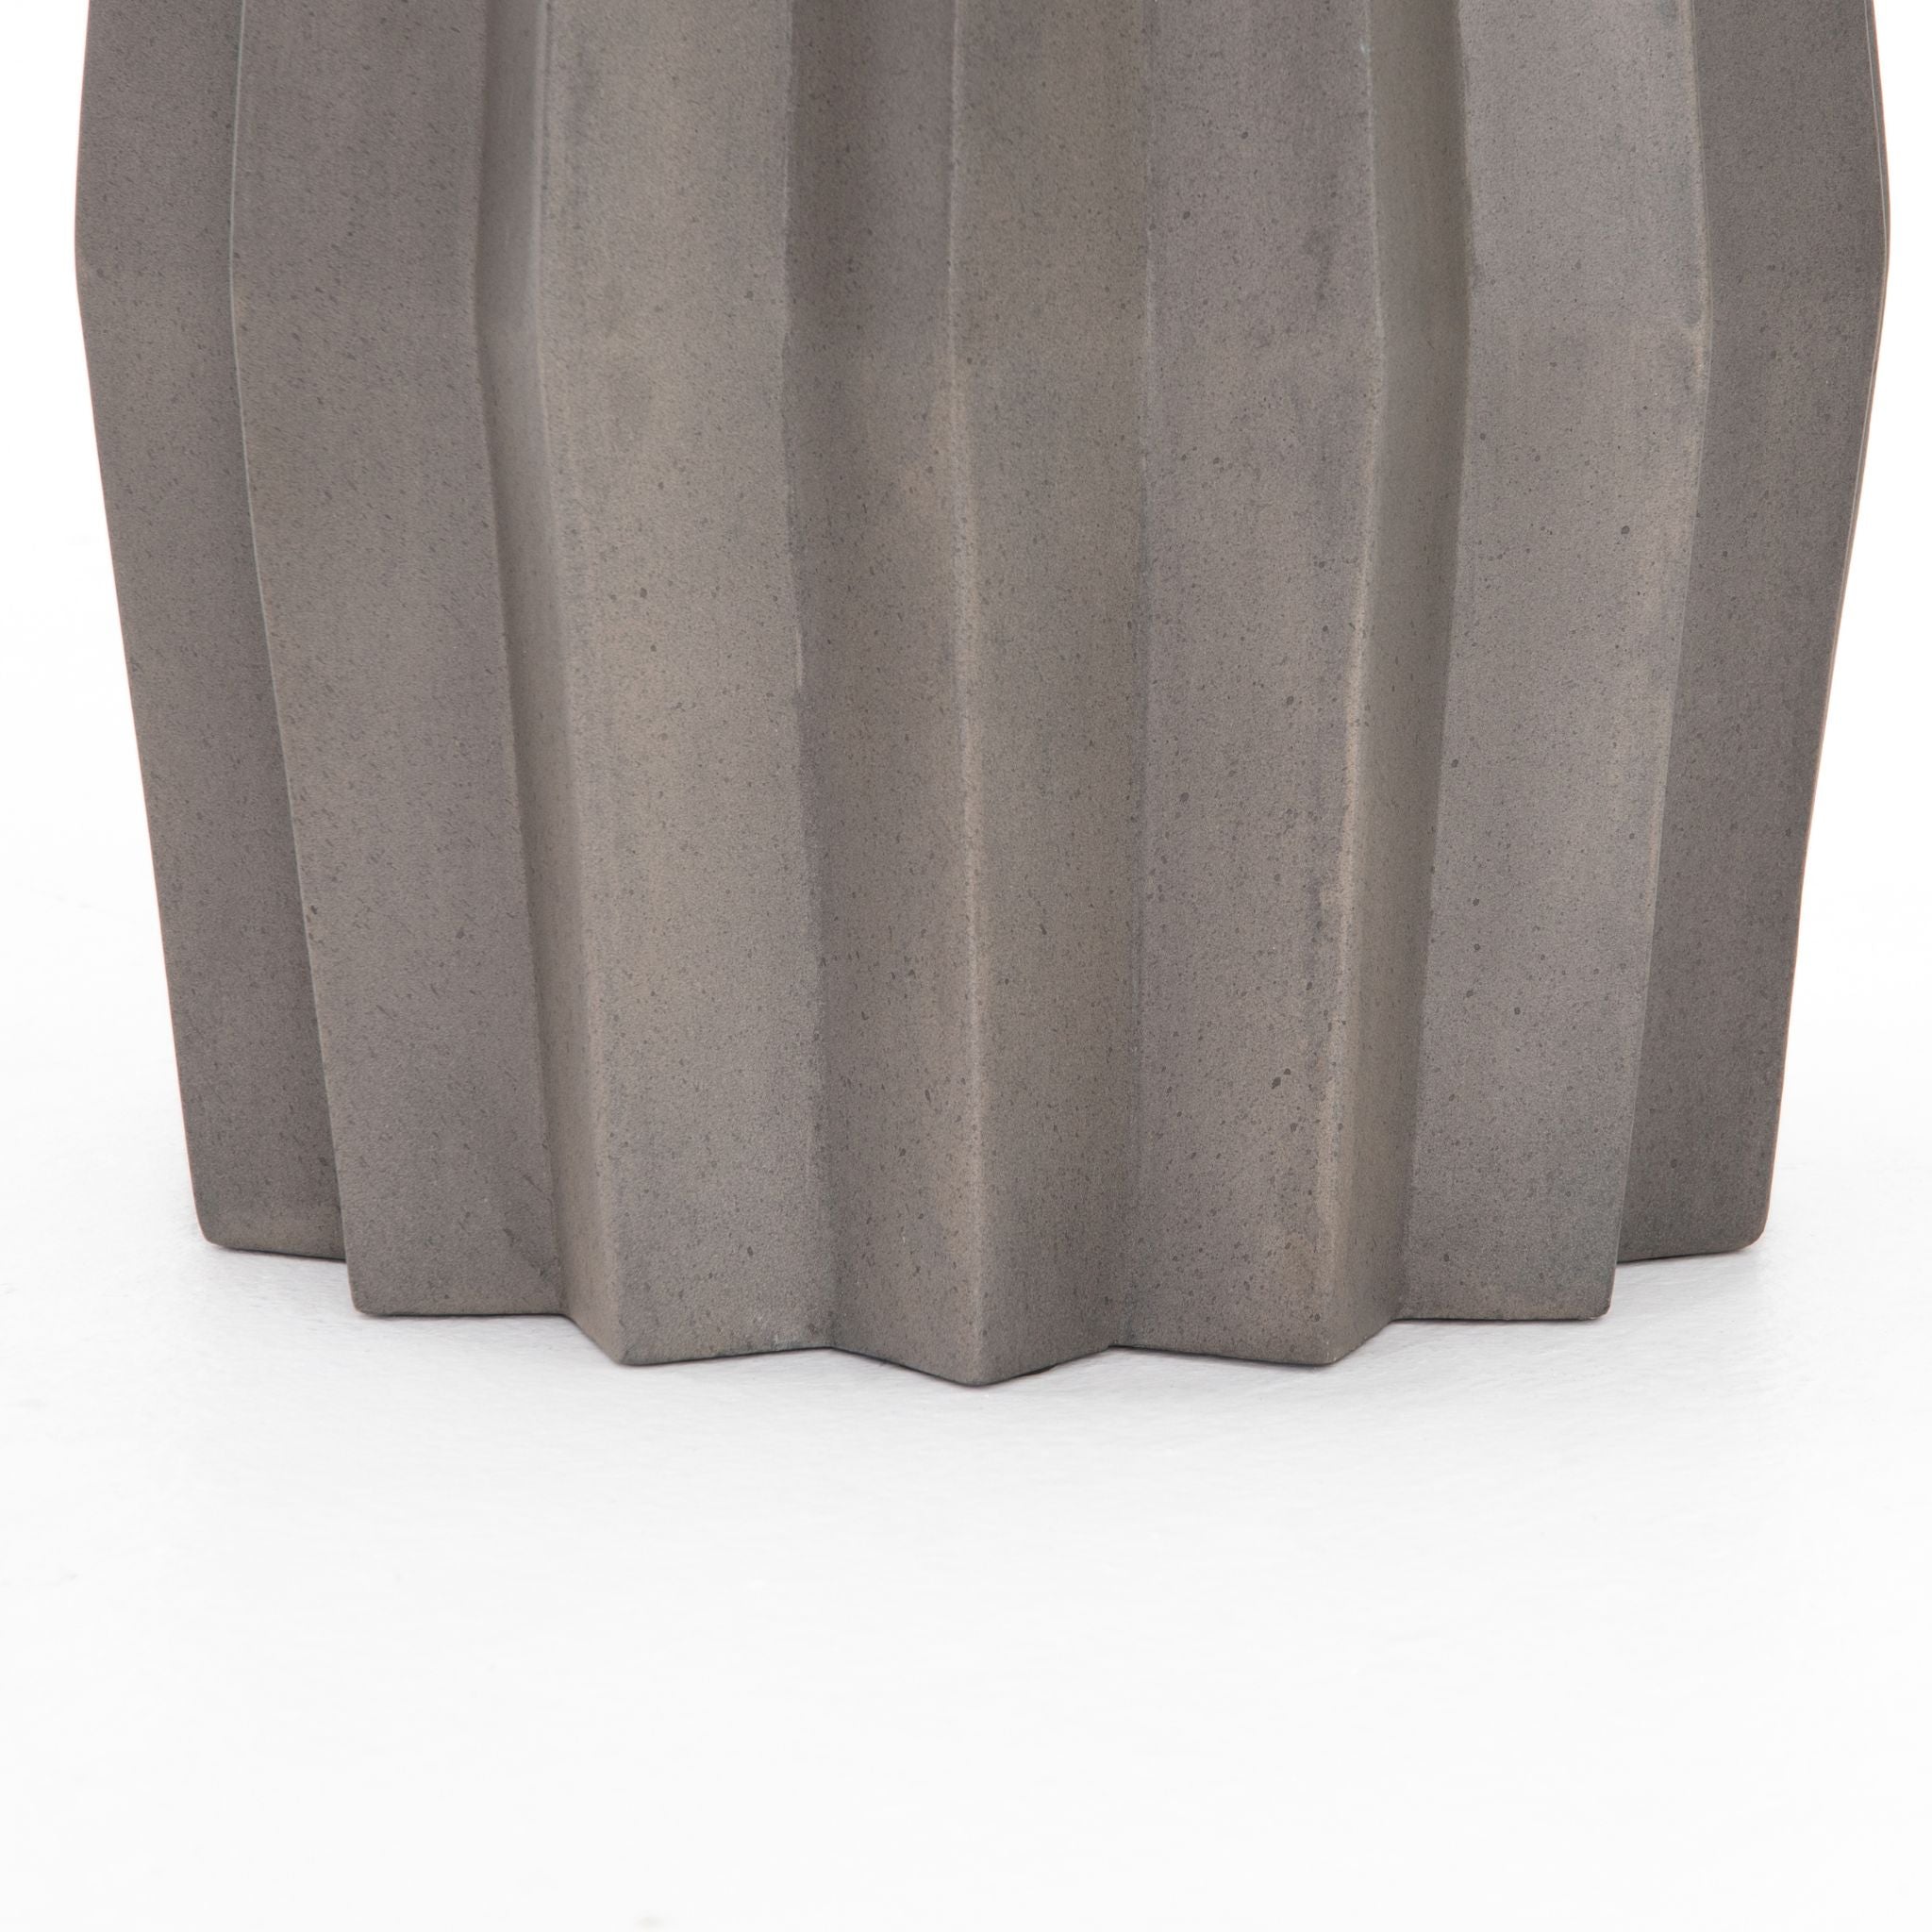 SIMPLY ELEVATED - Sculptural modern, made for outdoors. Fluted edge detailing delivers intriguing depth to solid concrete finished in an invitingly neutral dark grey. Shapely tabletop brings an extra surface to any space, indoors or out. Cover or store inside during inclement weather and when not in use.